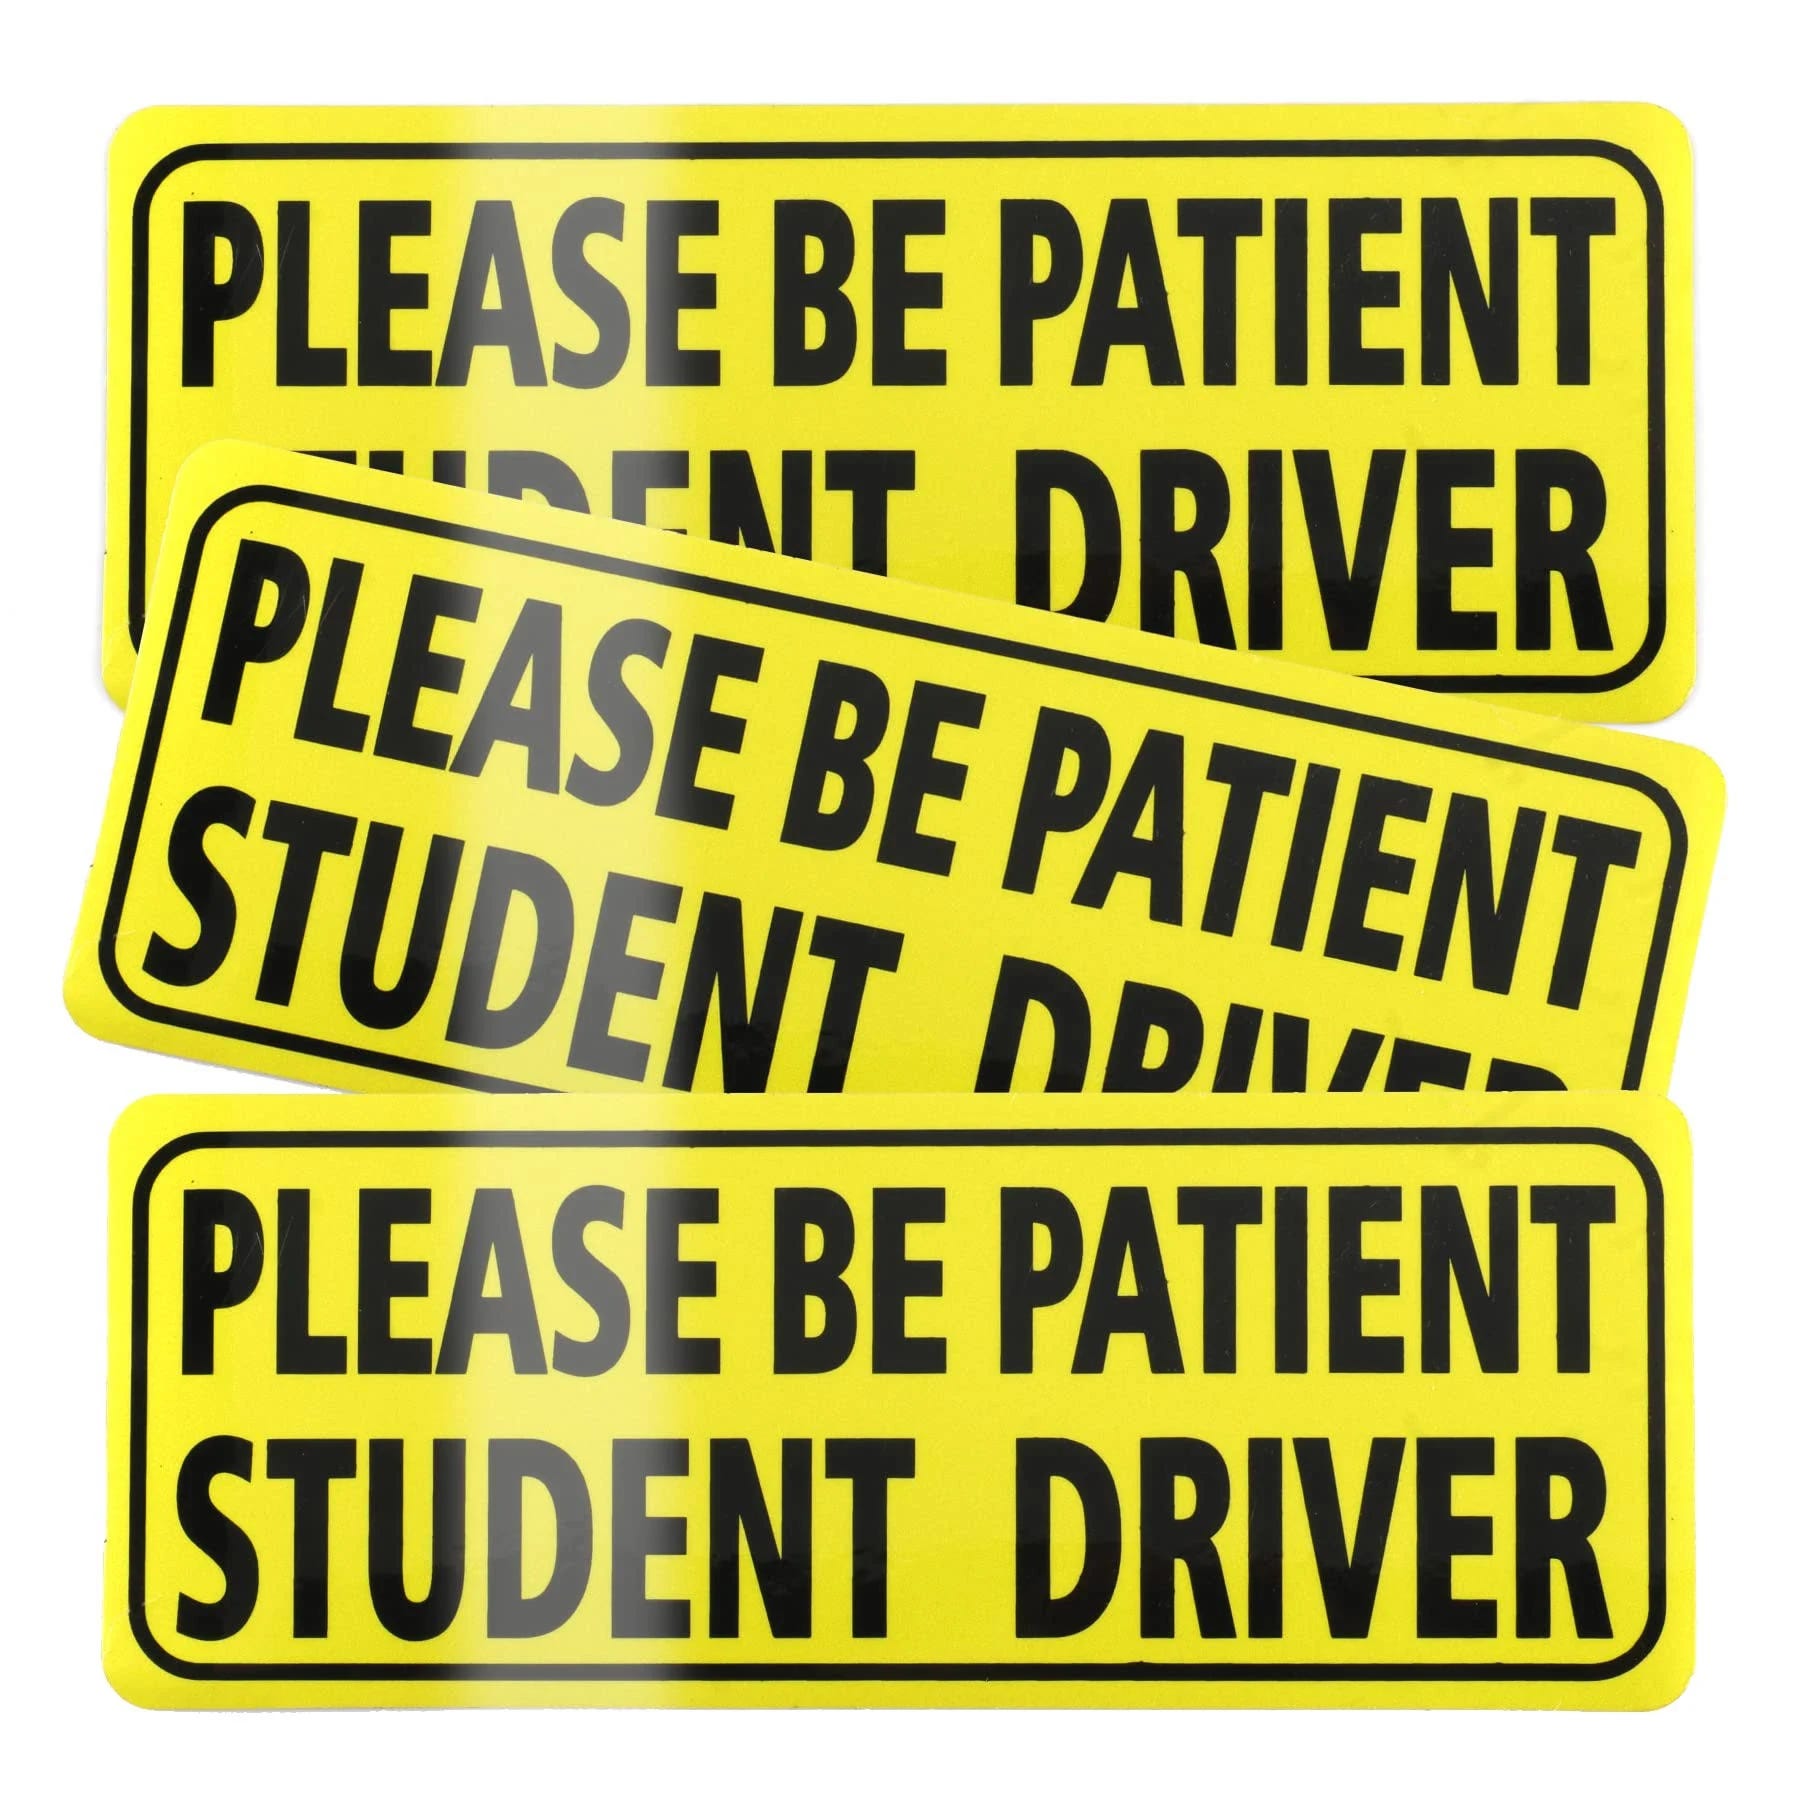 Student Driver Magnets: Weatherproof and Easy to See | Image